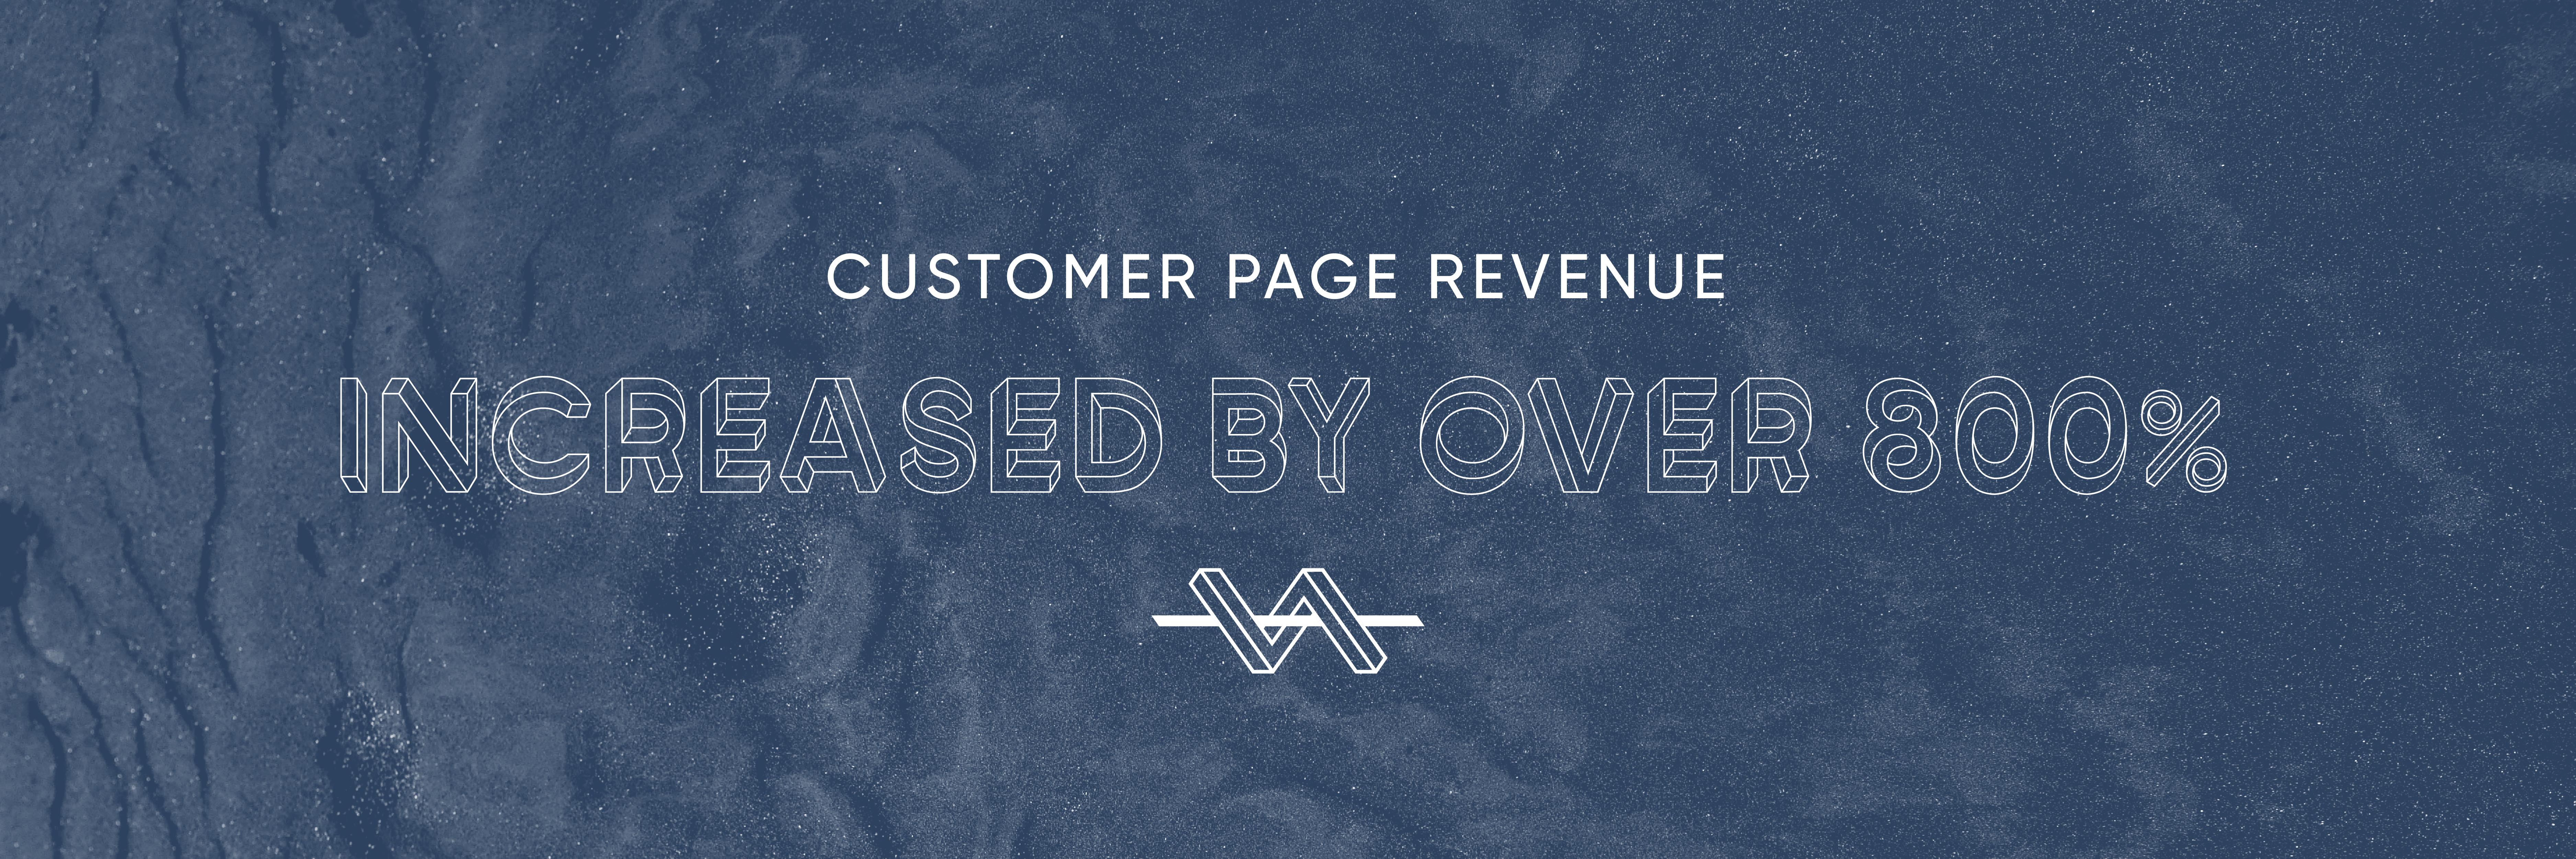 Customer page revenue increased by over 800%.